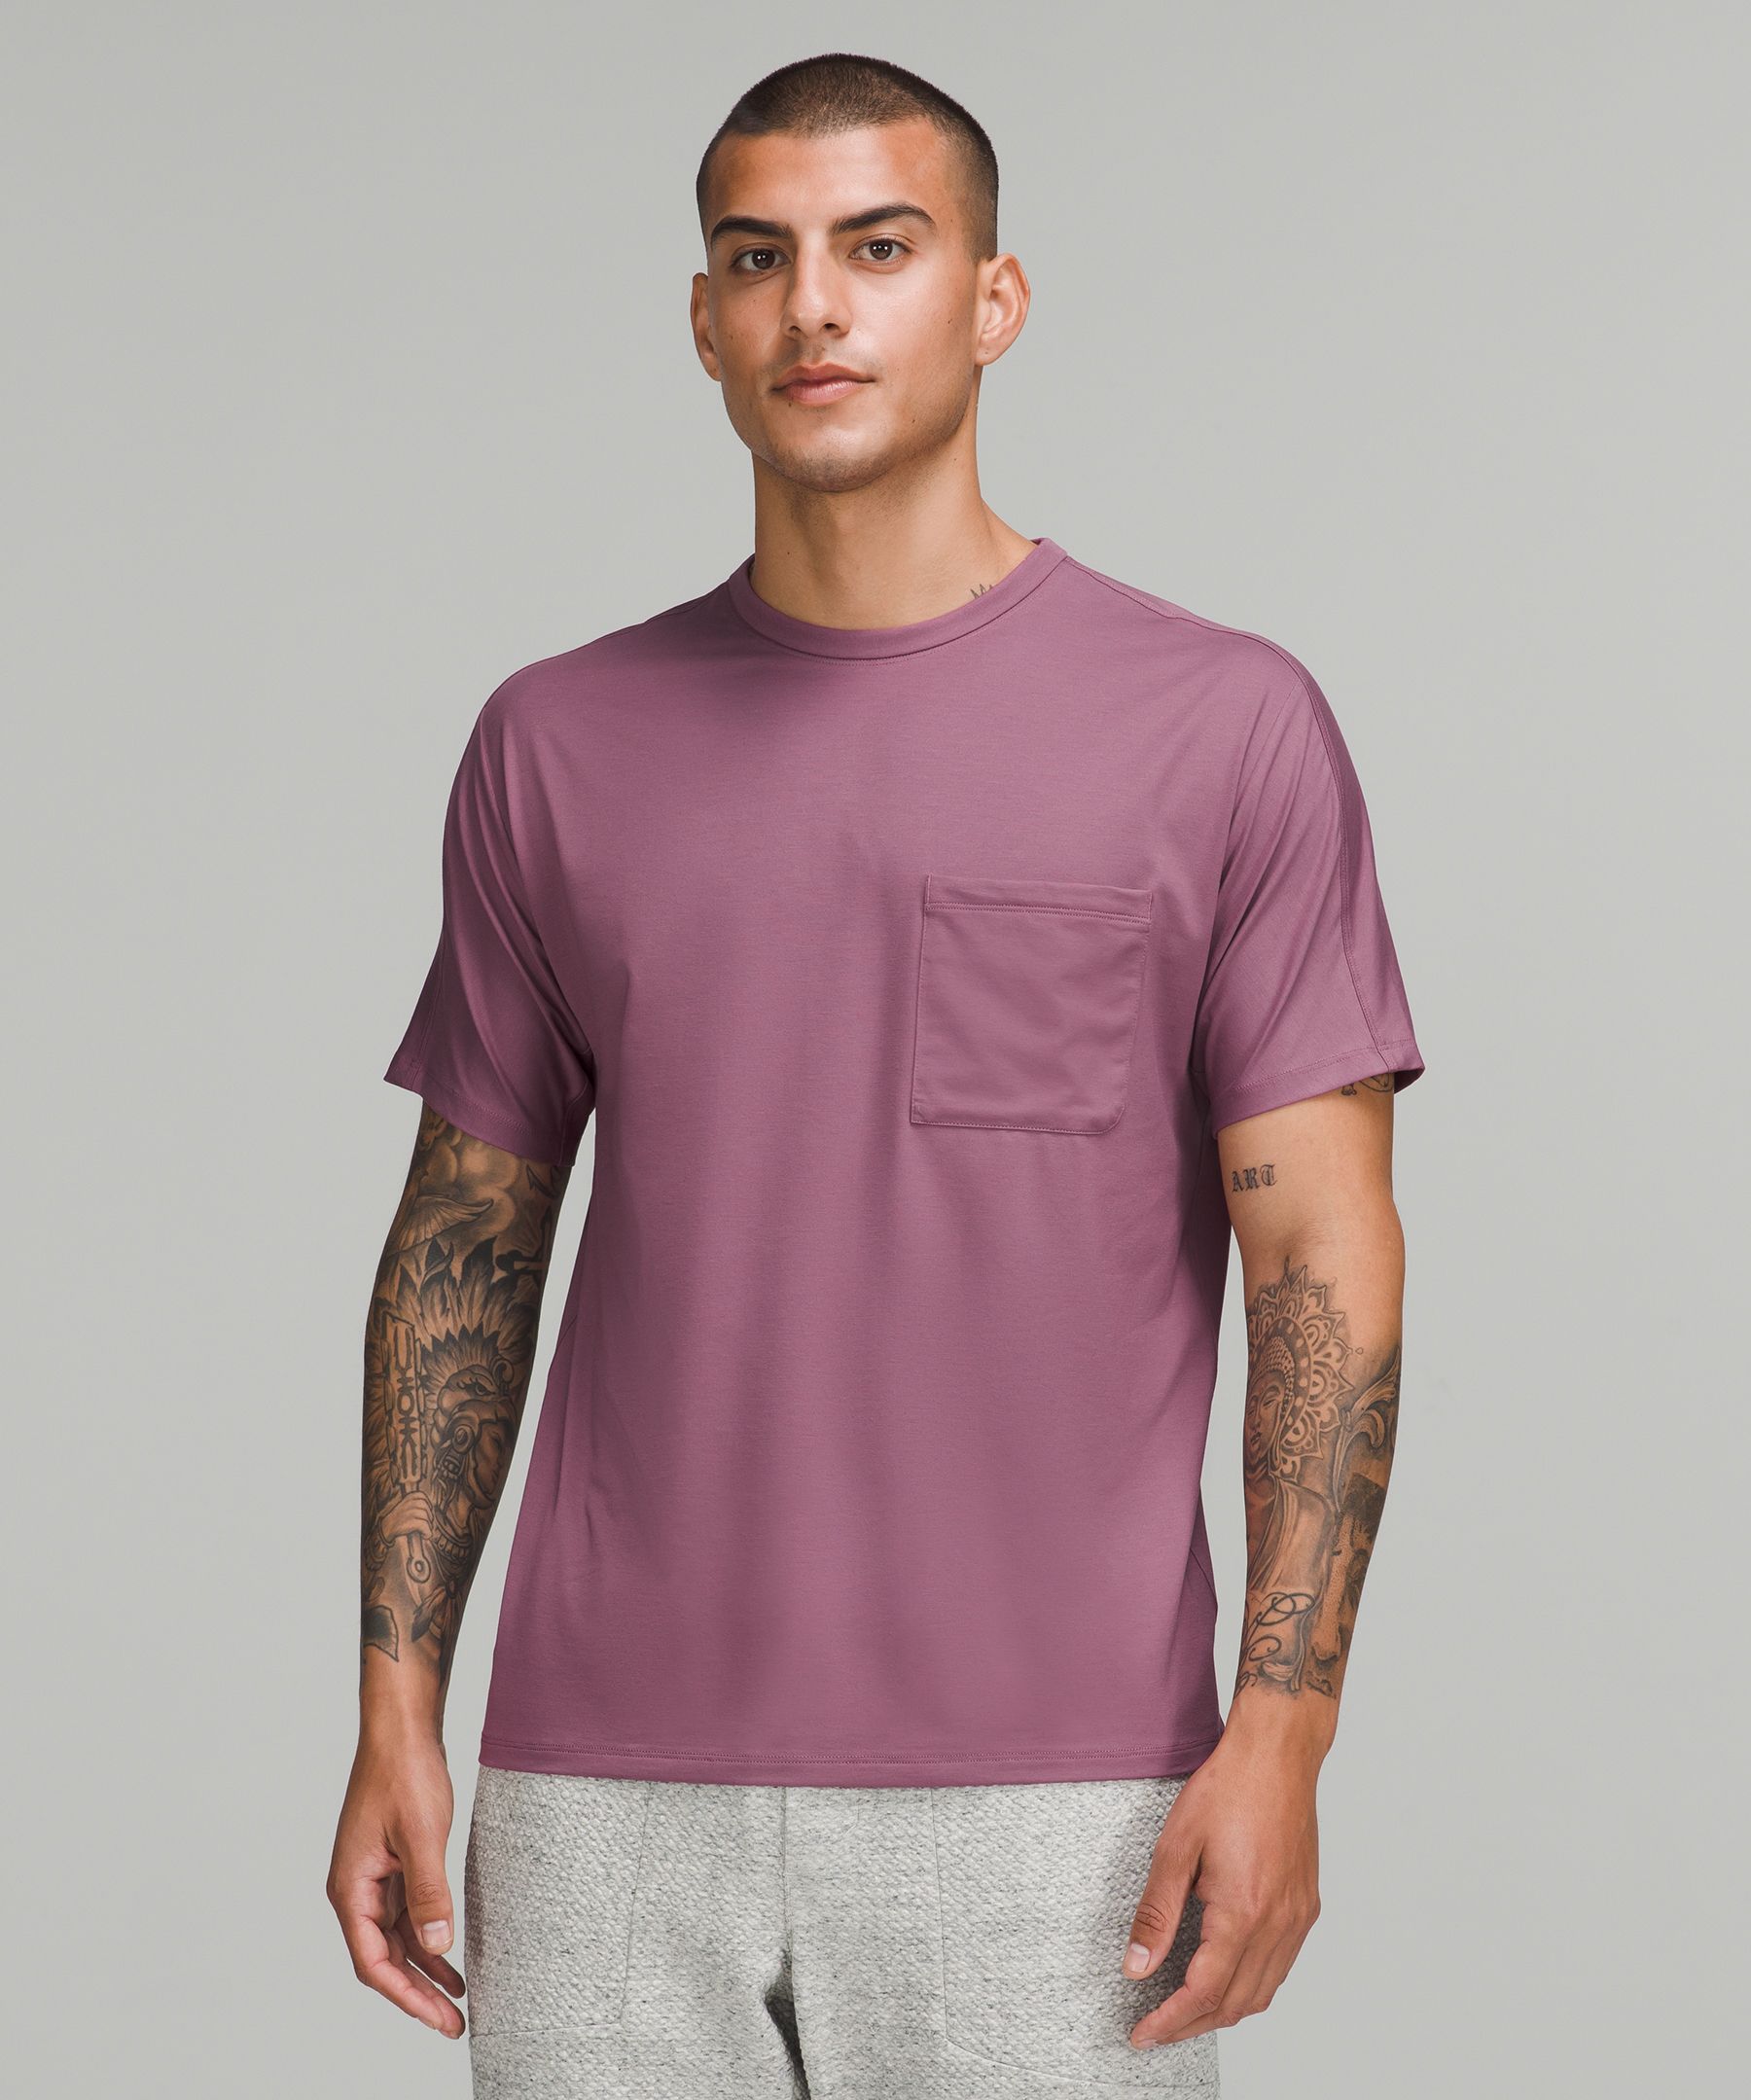 Requesting try on pics if anyone has the Softstreme Gathered T-shirt!! Or  reviews regarding fit : r/lululemon